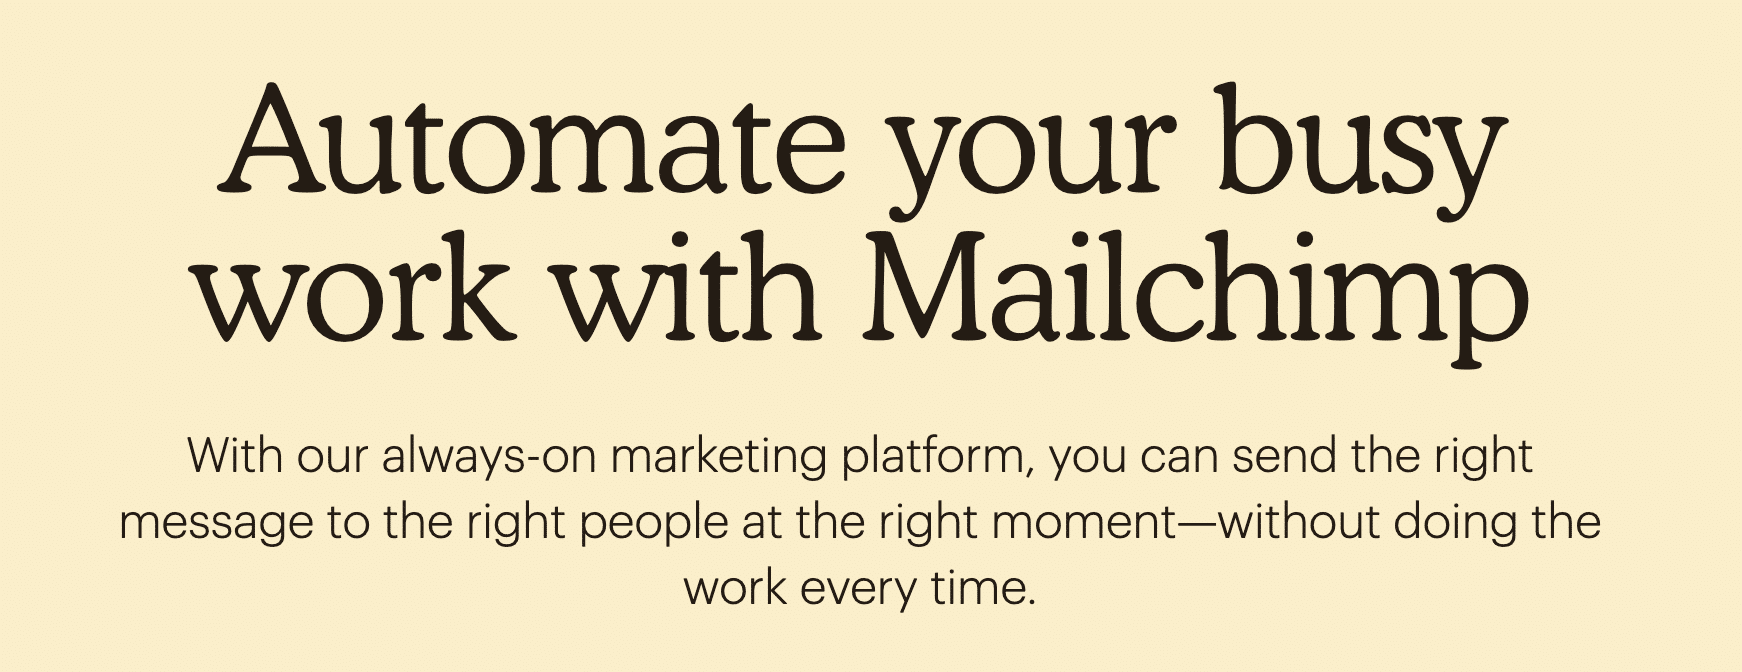 Banner di Mailchimp che si promuove con Automate Your Busy Work With Mailchimp